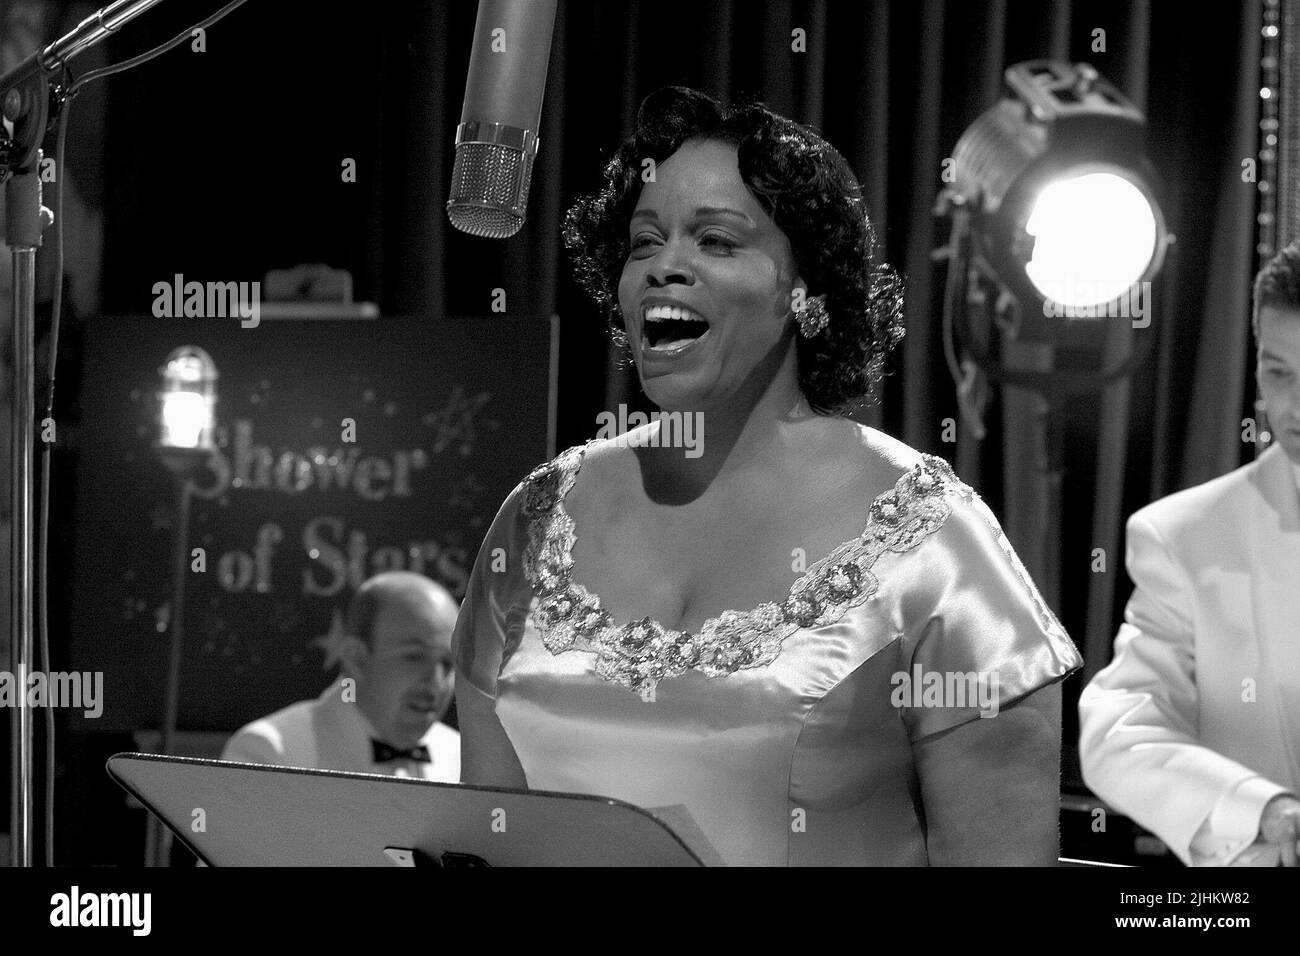 DIANNE REEVES, GOOD NIGHT  AND GOOD LUCK, 2005 Stock Photo